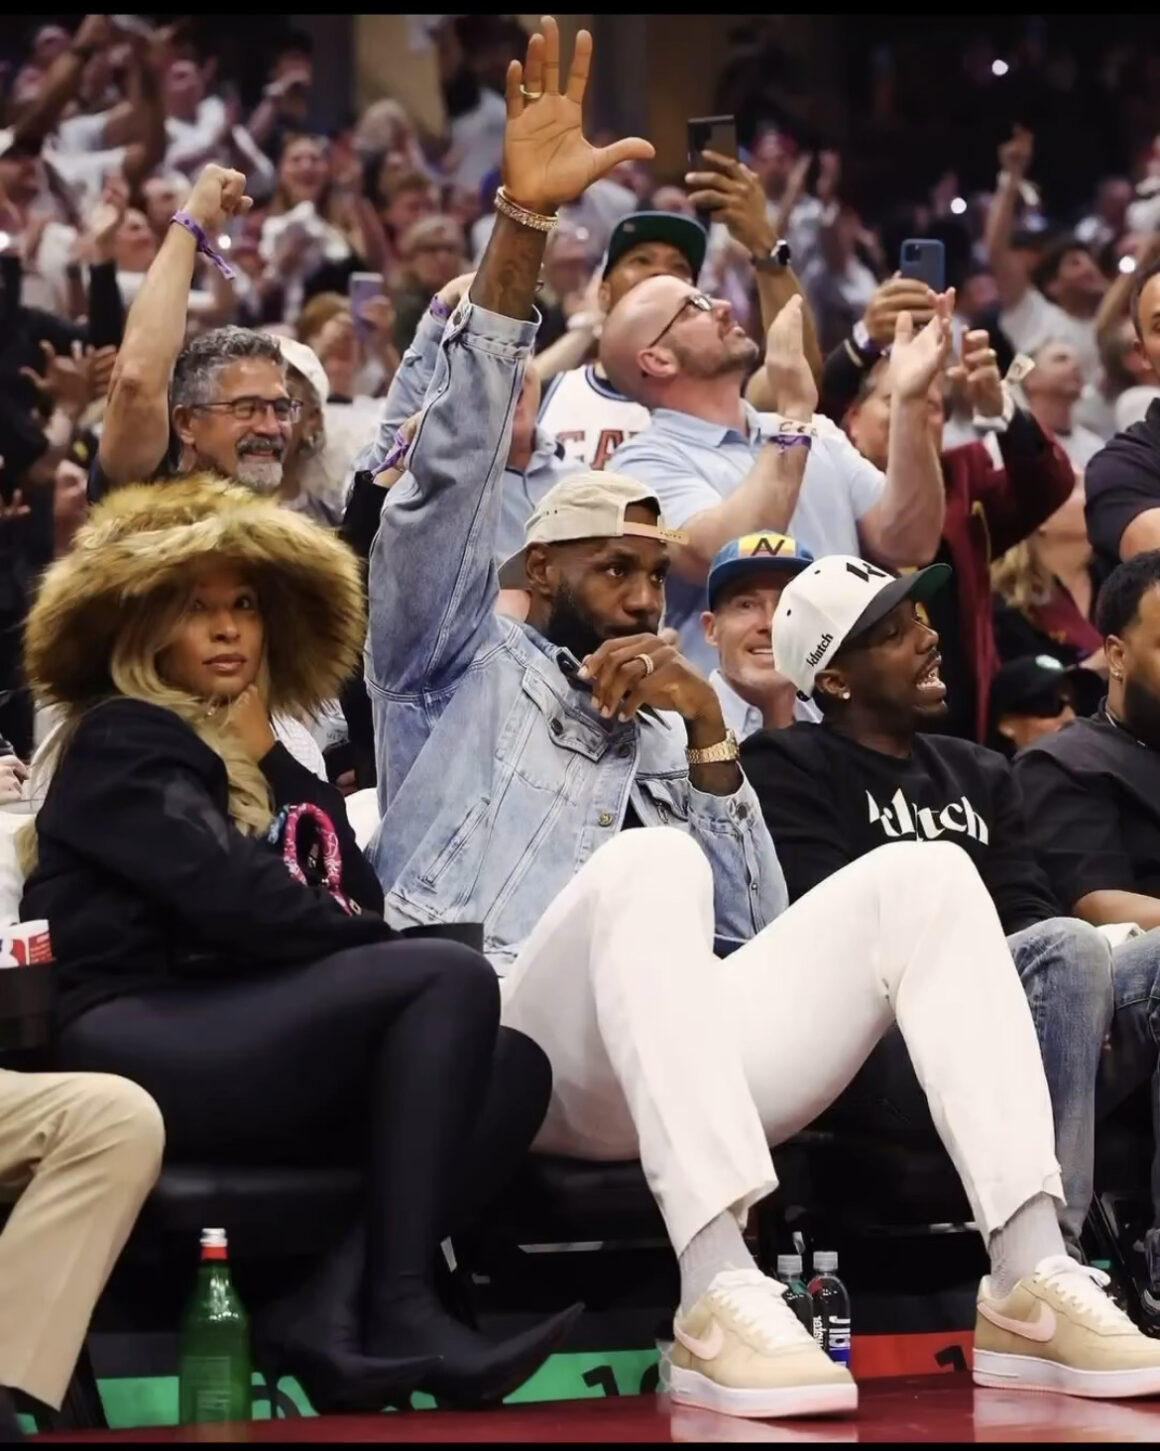 style-bomb-equipment:-you-ask,-we-reply!-savannah-james-attended-the-nba-playoffs-with-lebron-james-in-a-$160-brown-tyler-lambert-furry-bucket-hat